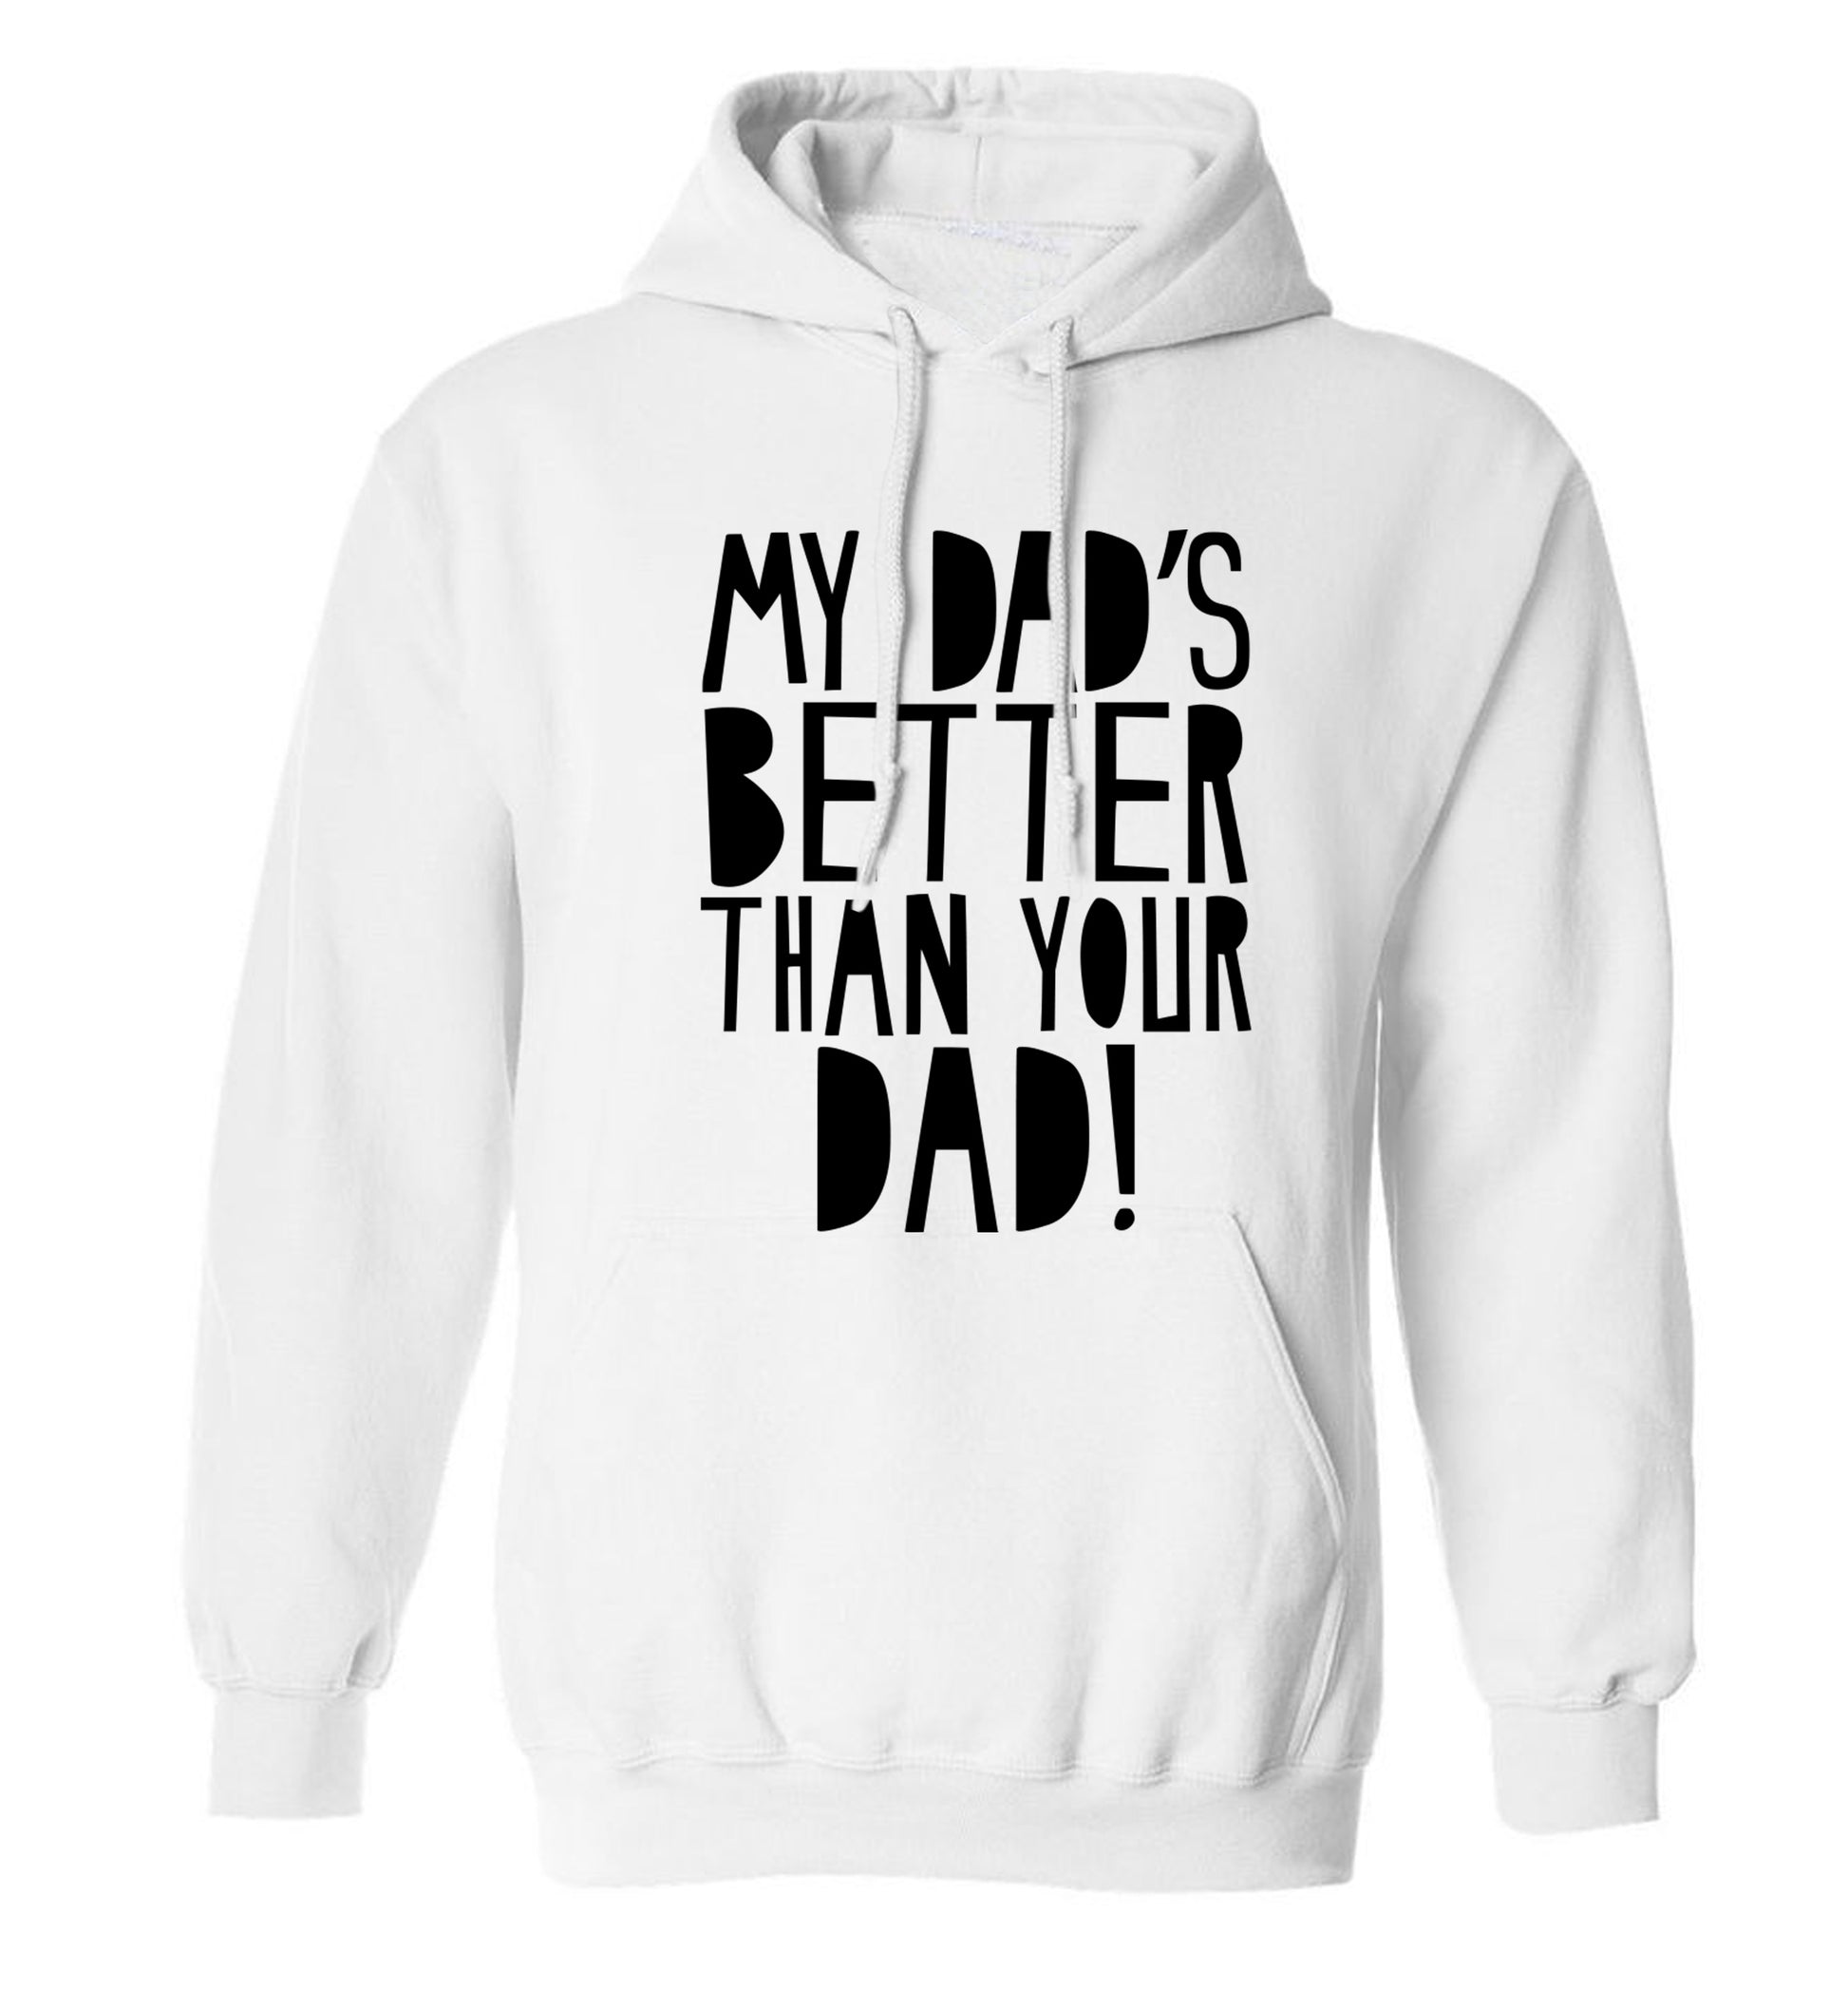 My dad's better than your dad adults unisex white hoodie 2XL